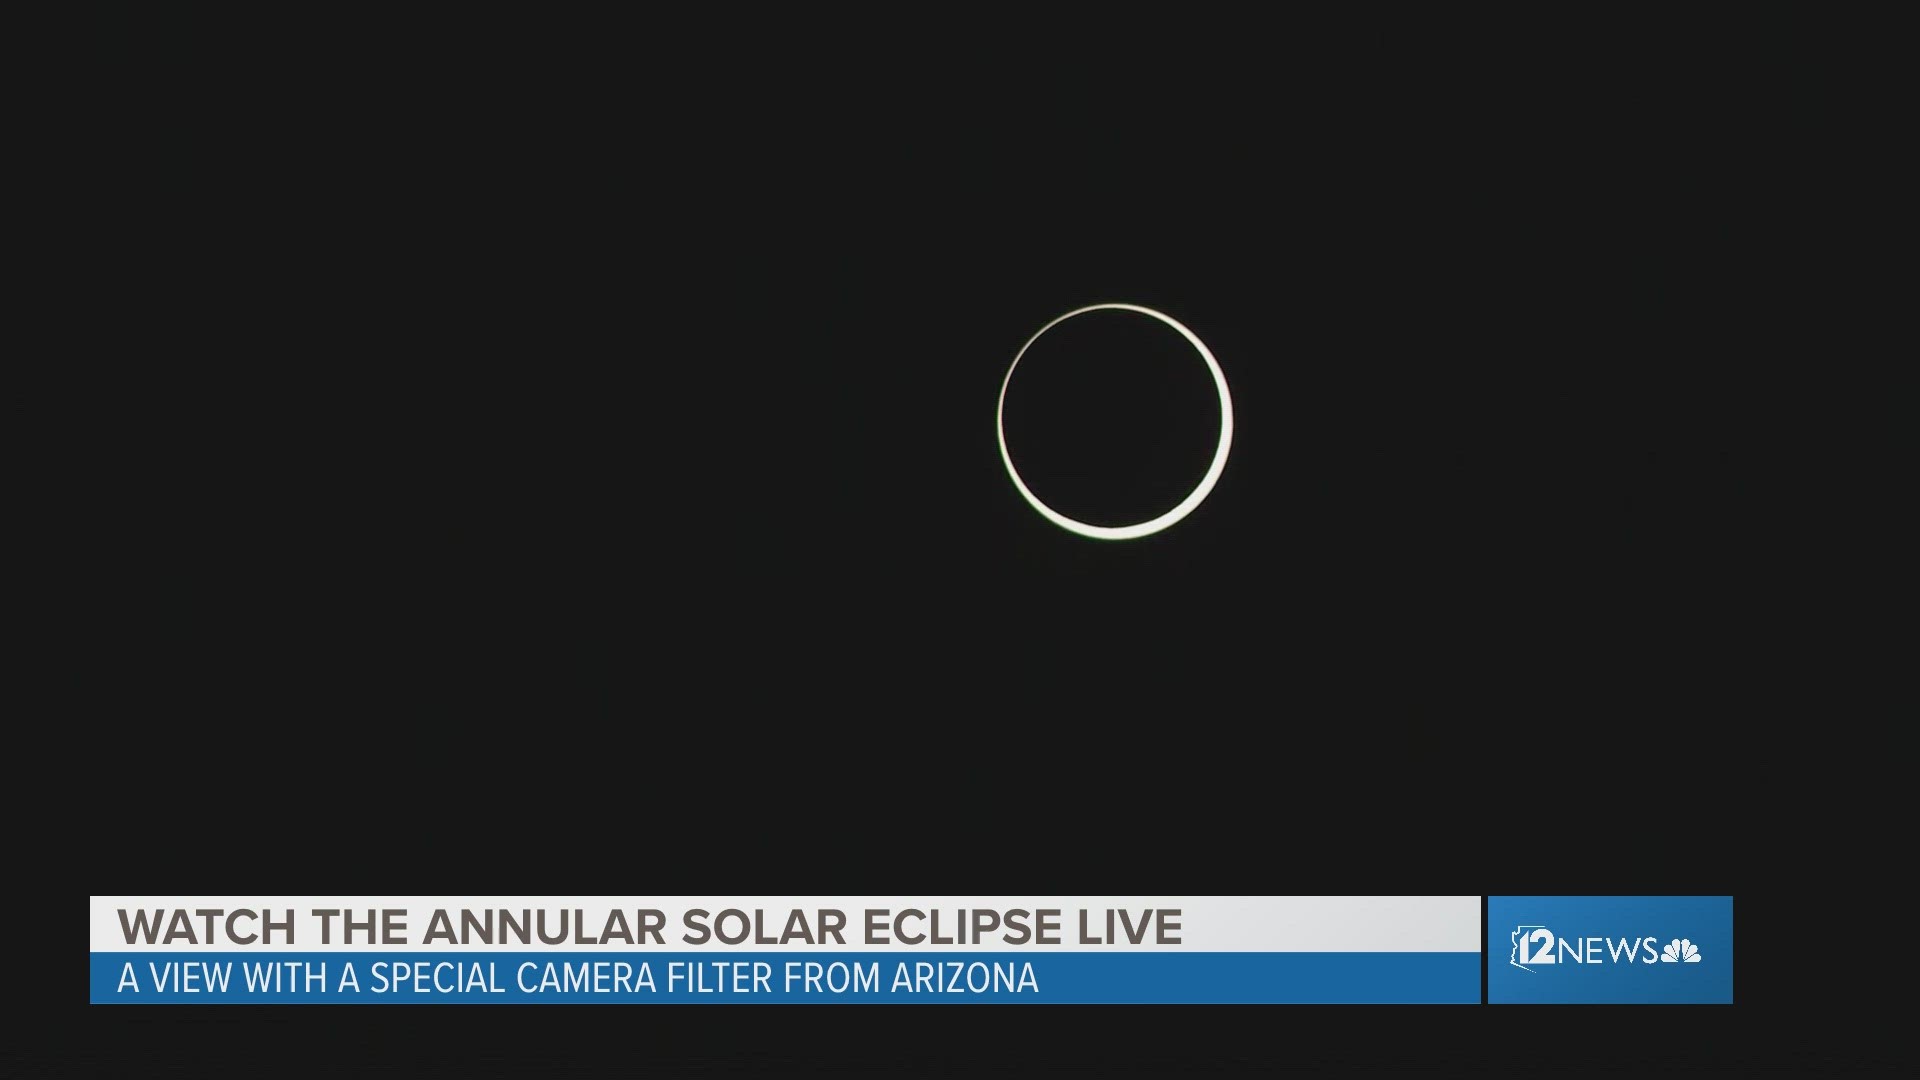 Replay watch the 'Ring of Fire' solar eclipse 2023 from Arizona